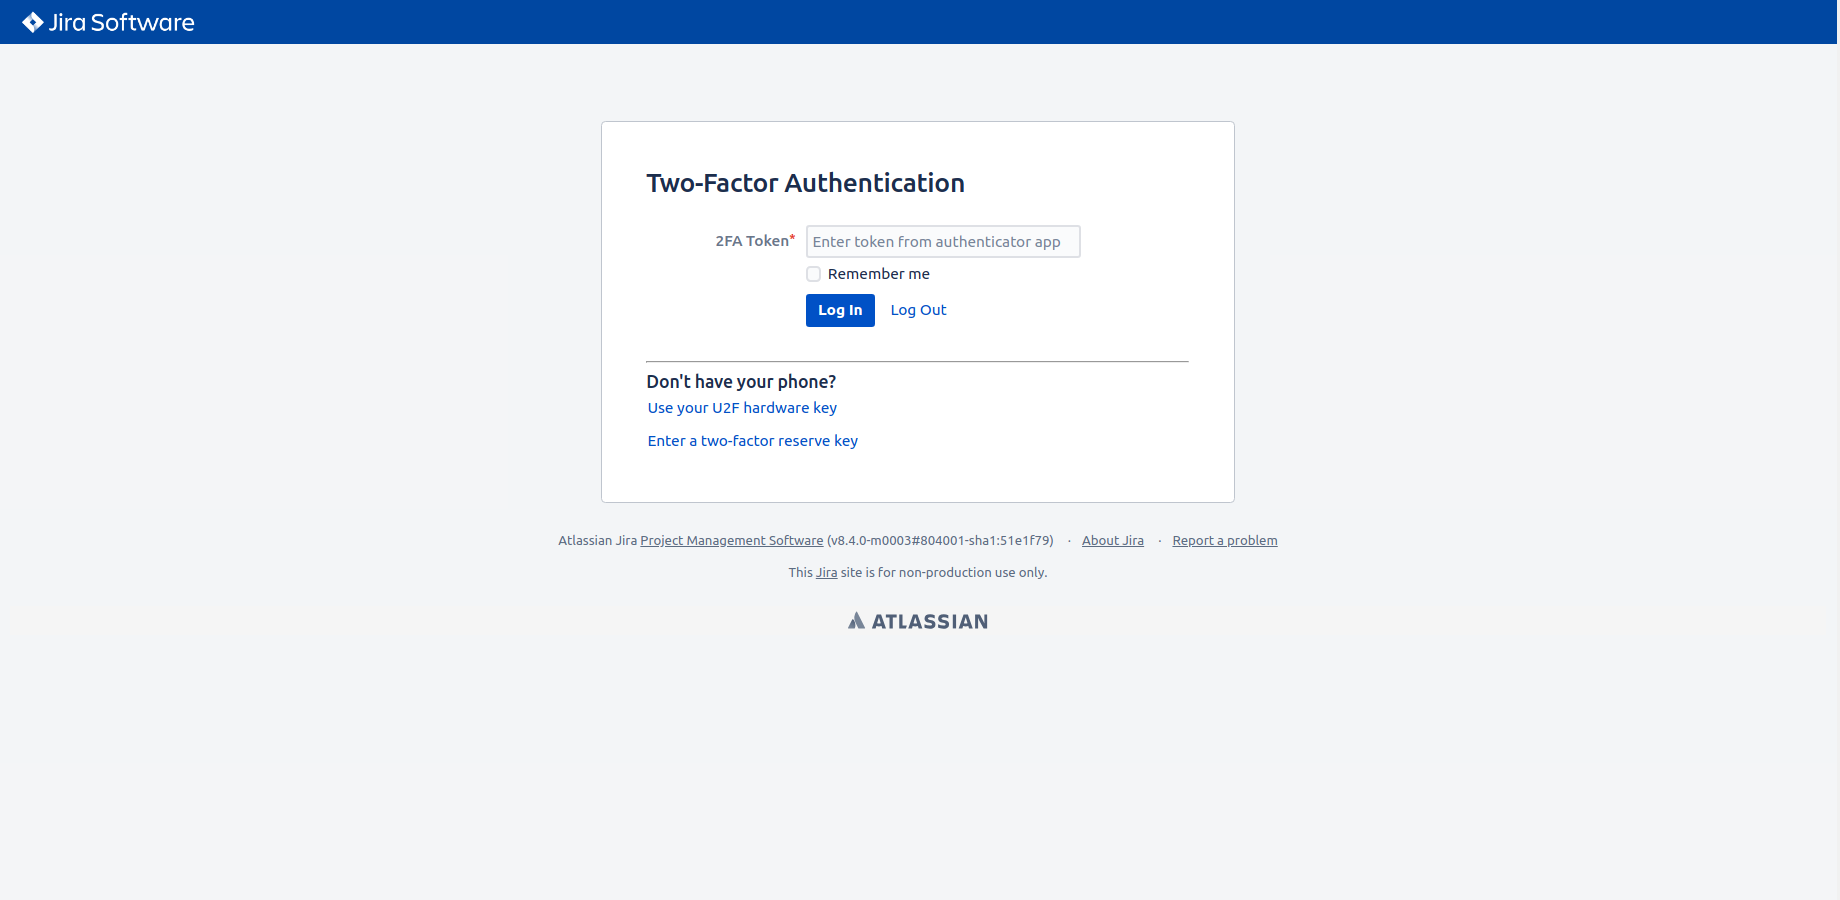 Enabled 2FA for Jira